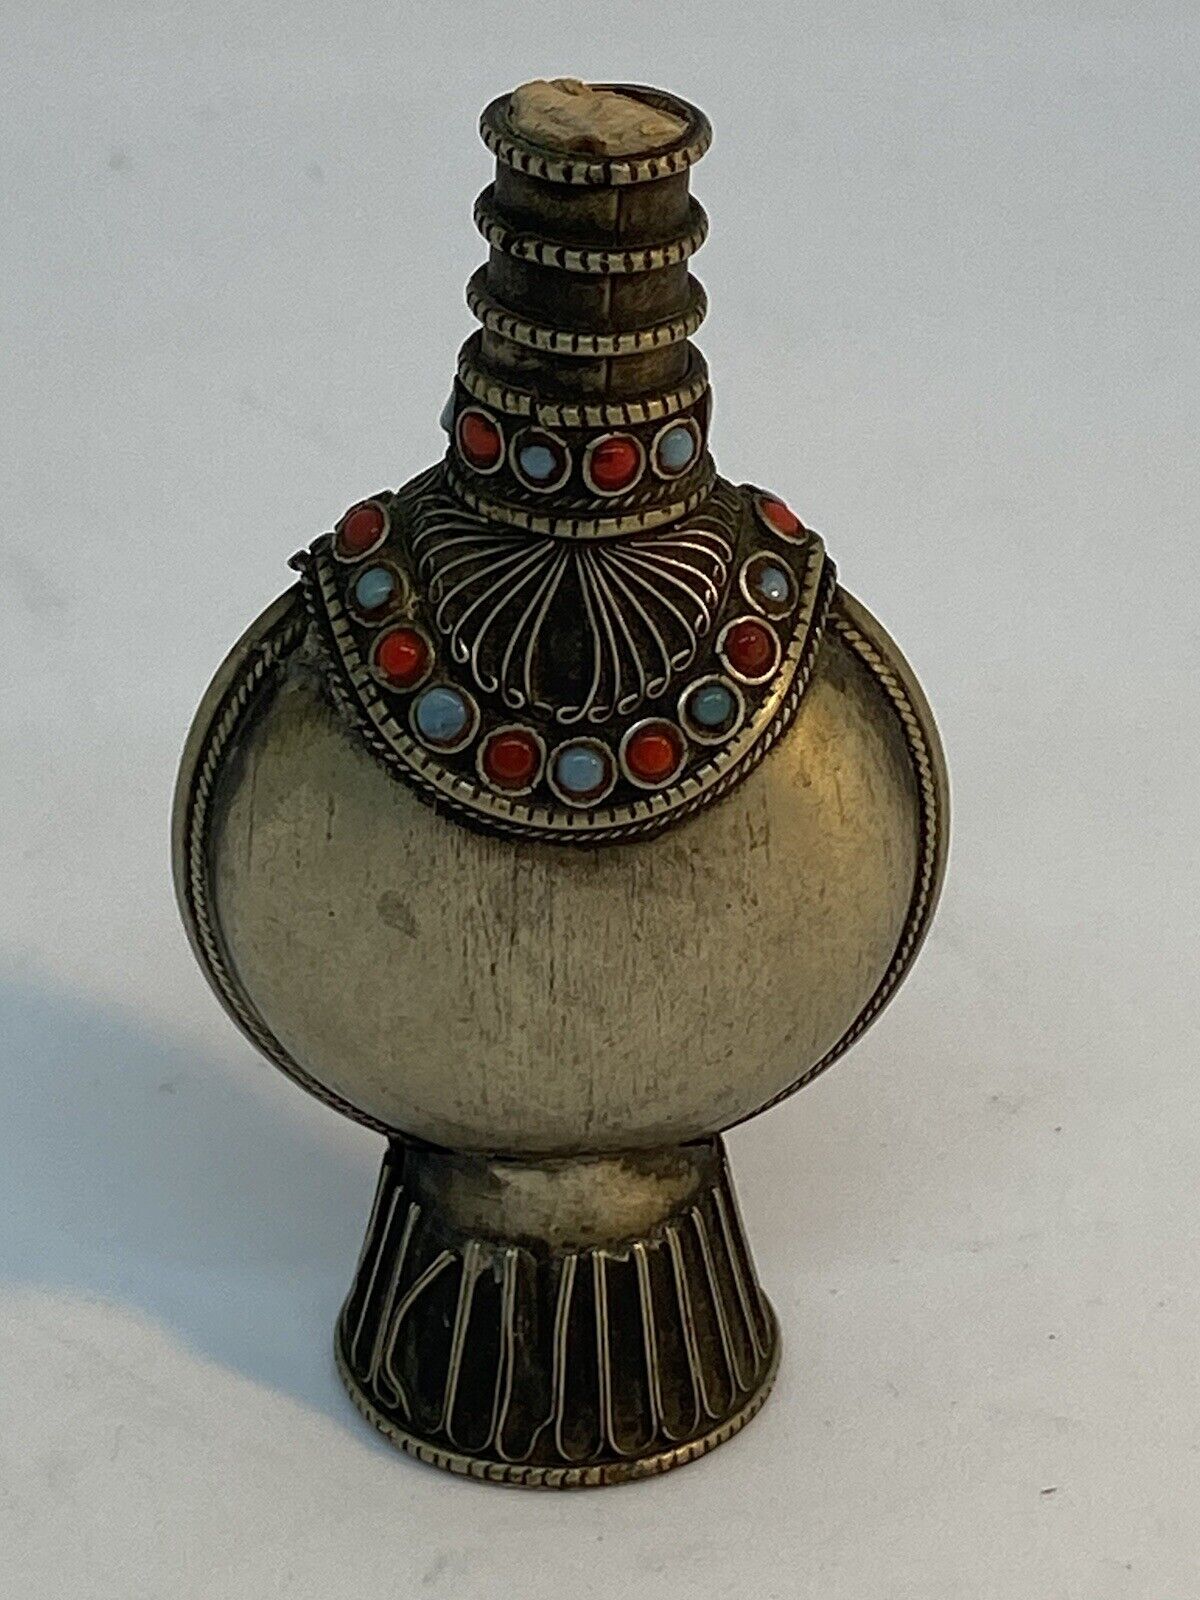 ANTIQUE OTTOMAN ISLAMIC HANDMADE CARVED WHITE METAL PERFUME BOTTLE DECORATED